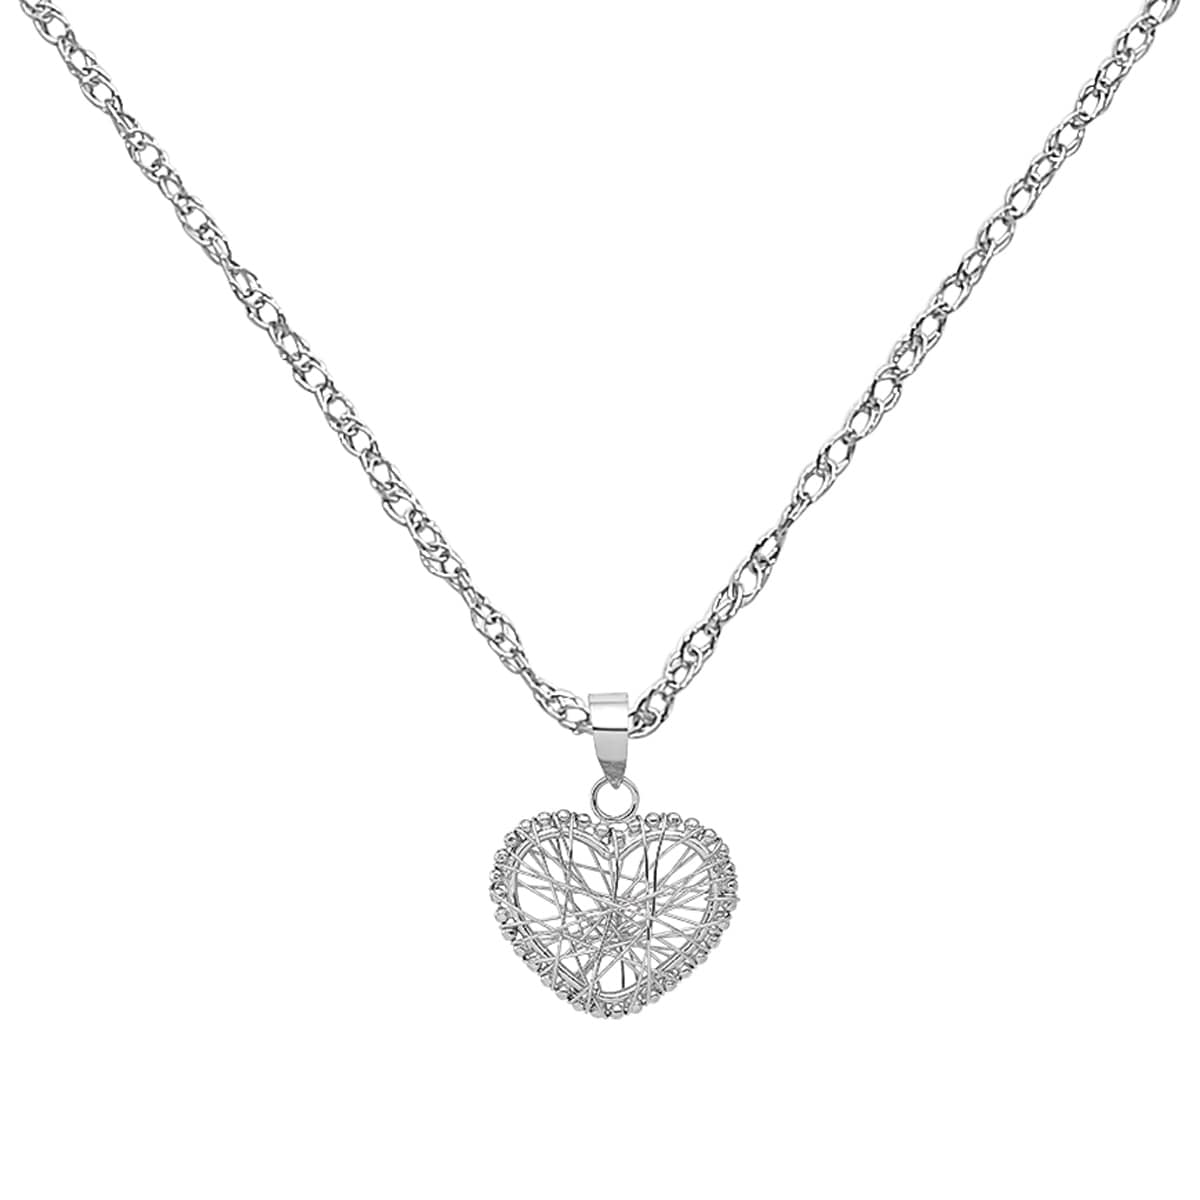 14K White Gold Open Wire Heart Pendant with 18-inch Cable Rope Chain by Versil